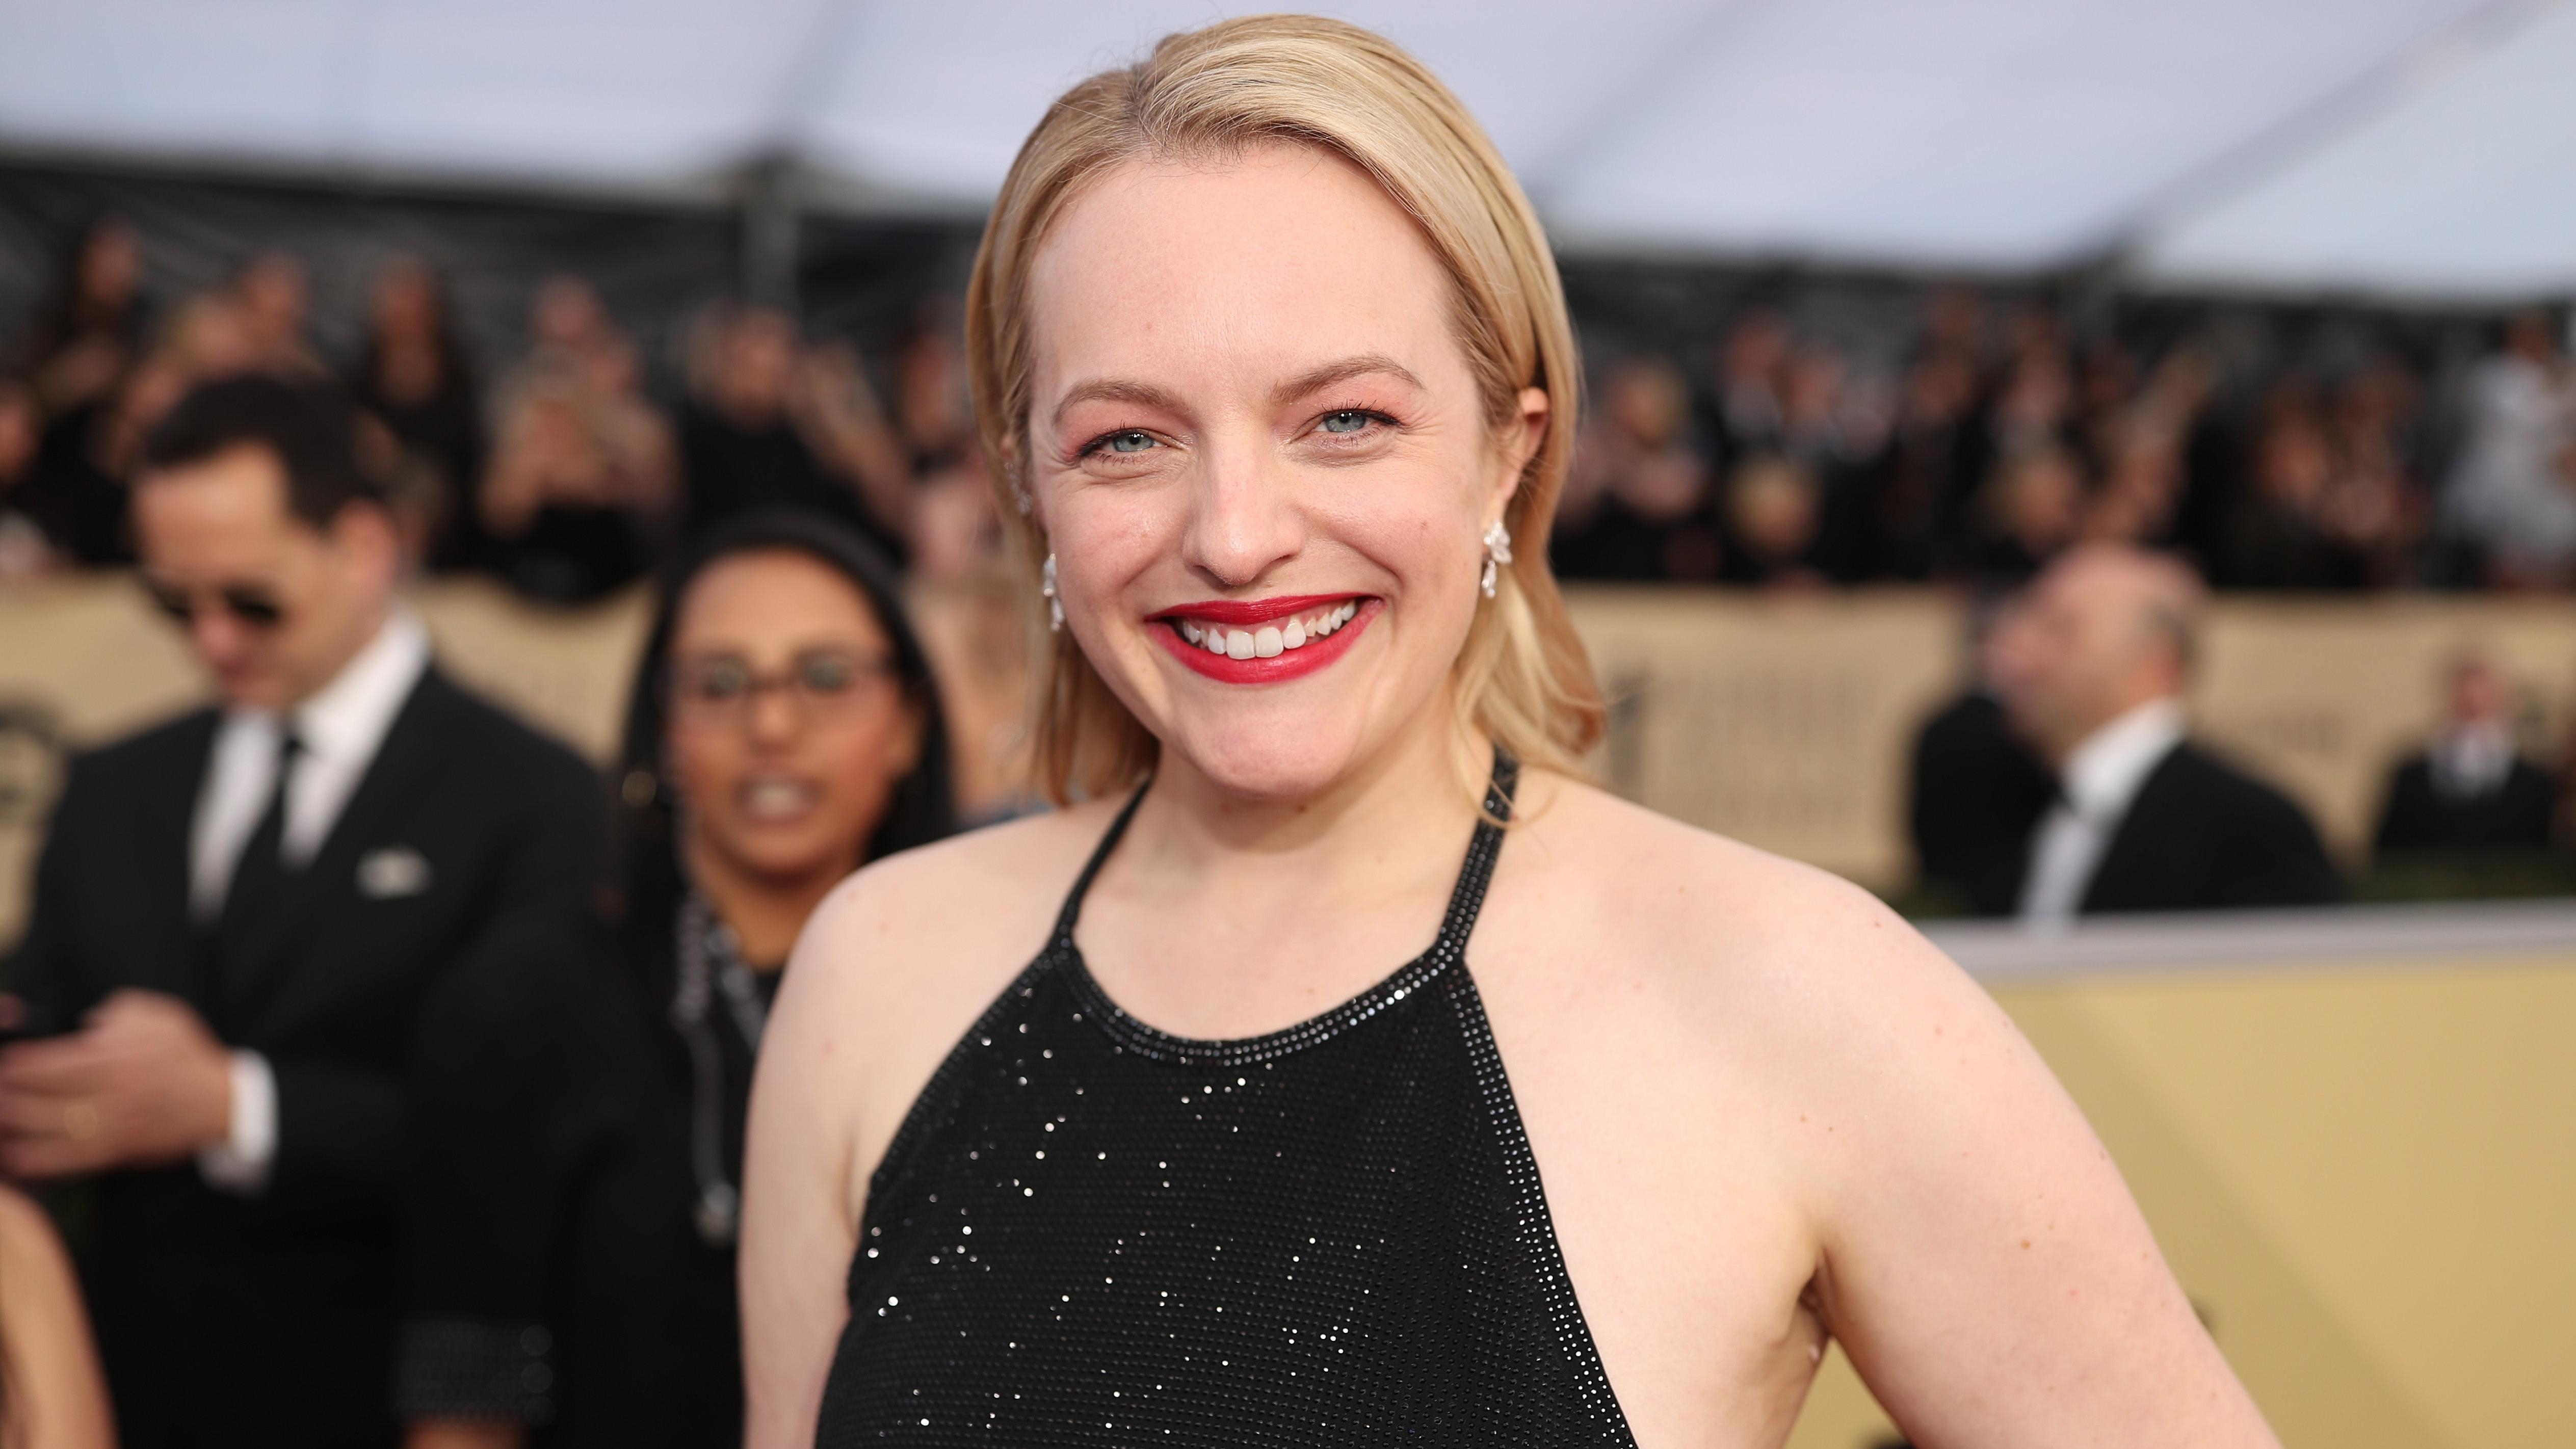 Elisabeth Moss explains why she doesn’t speak openly about being a Scientologist too often